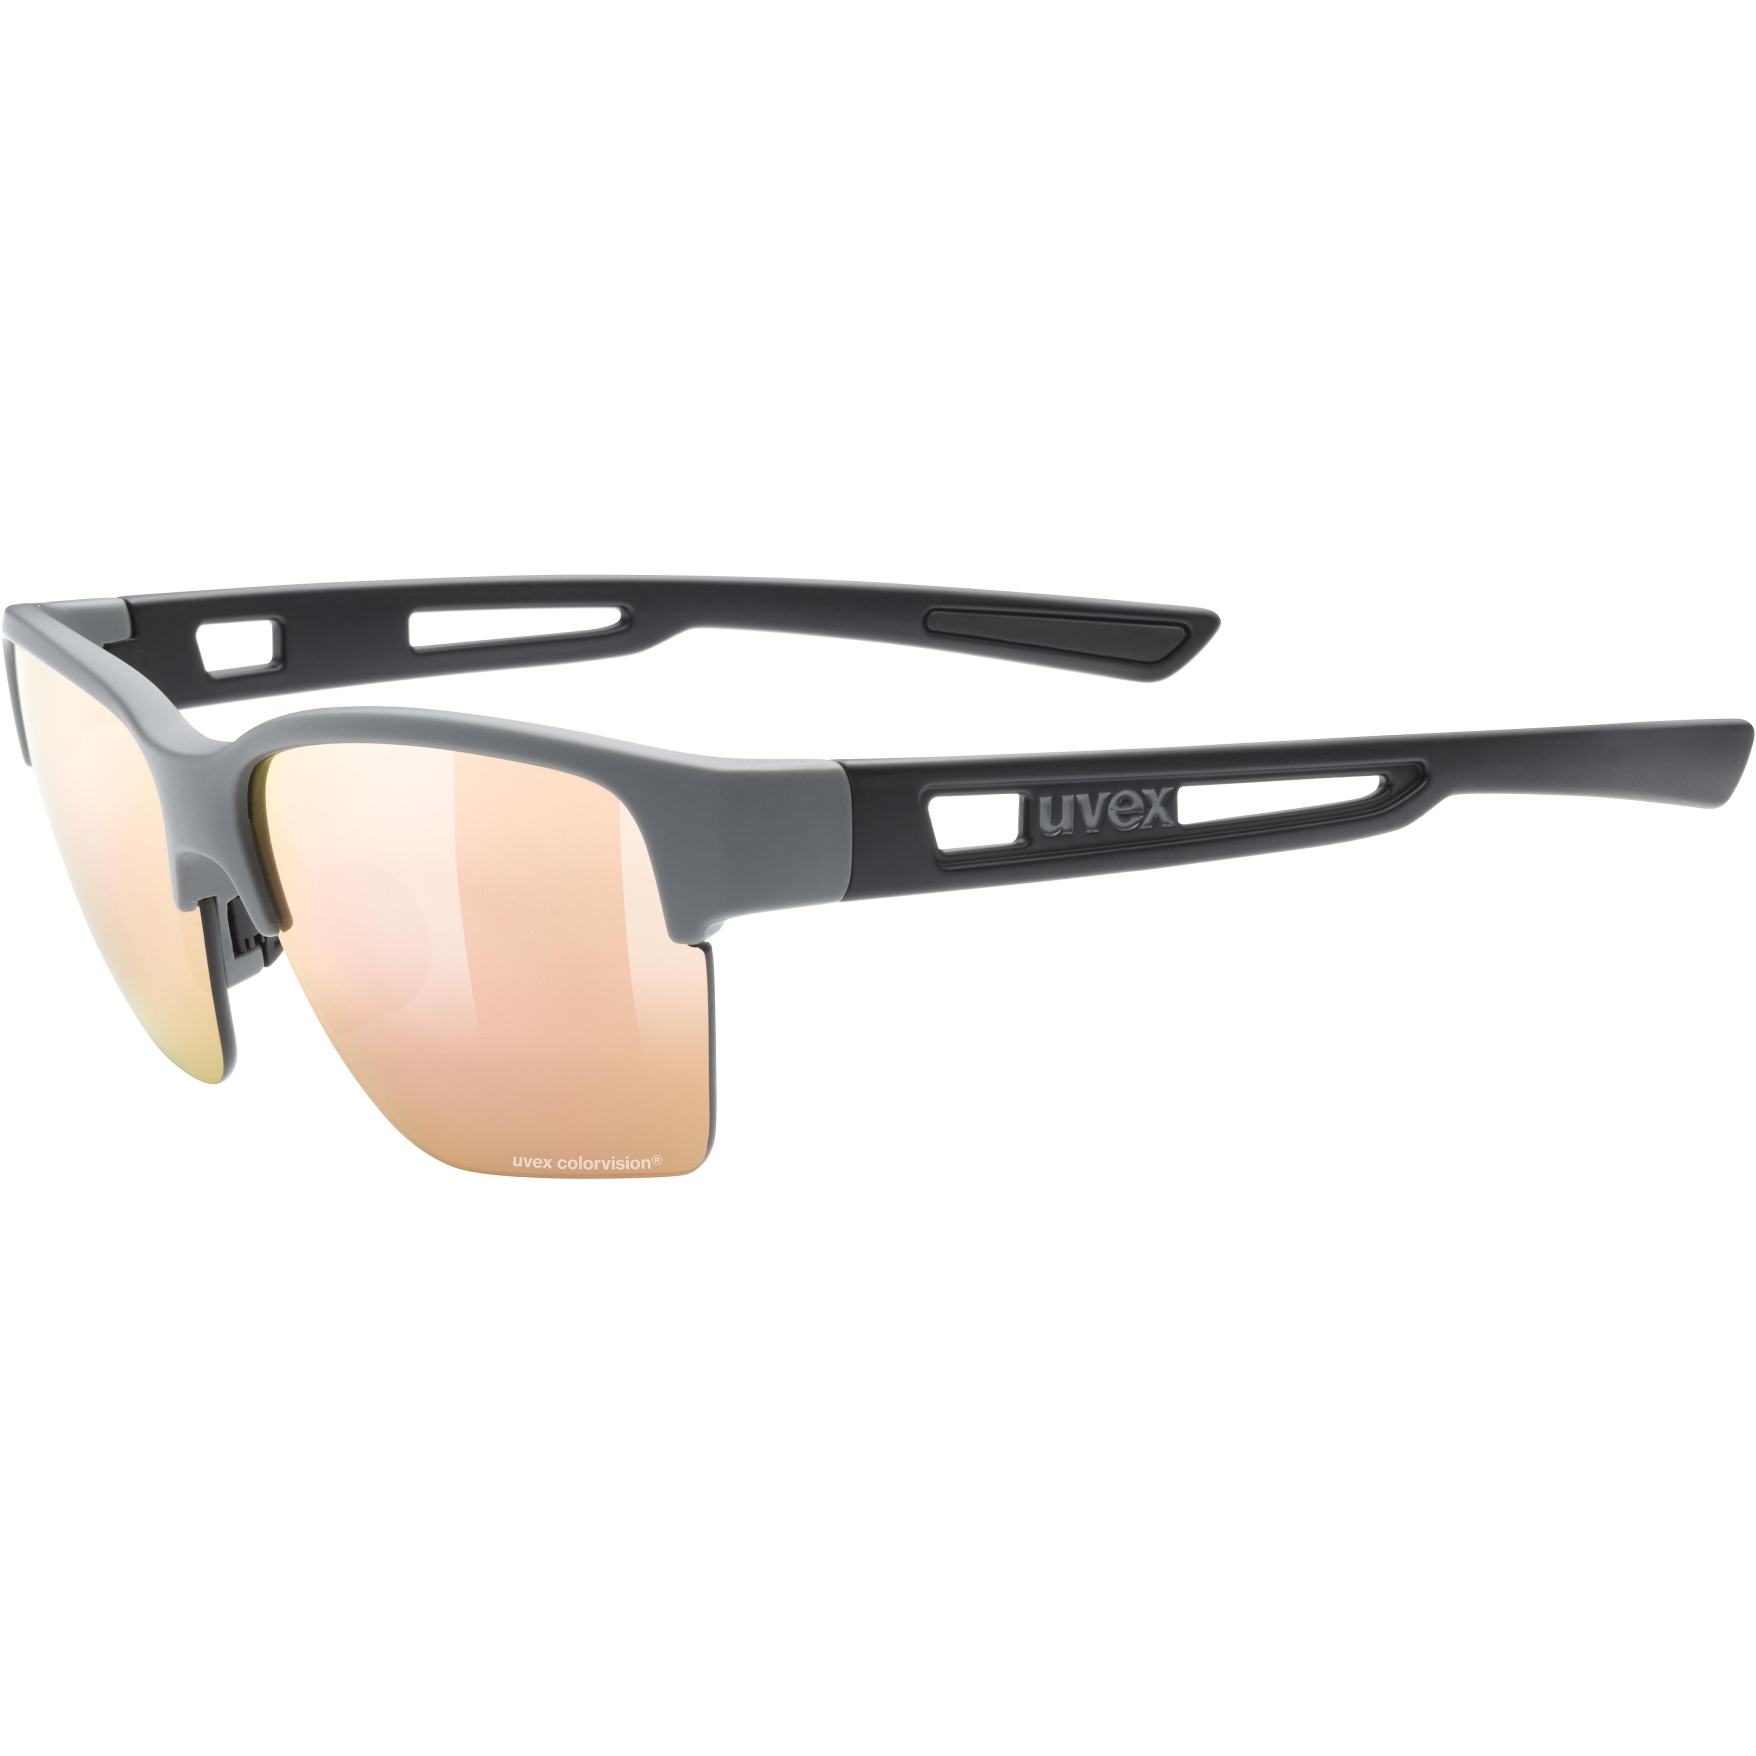 Picture of Uvex sportstyle 805 CV Glasses - rhino black mat/colorvision mirror champagne